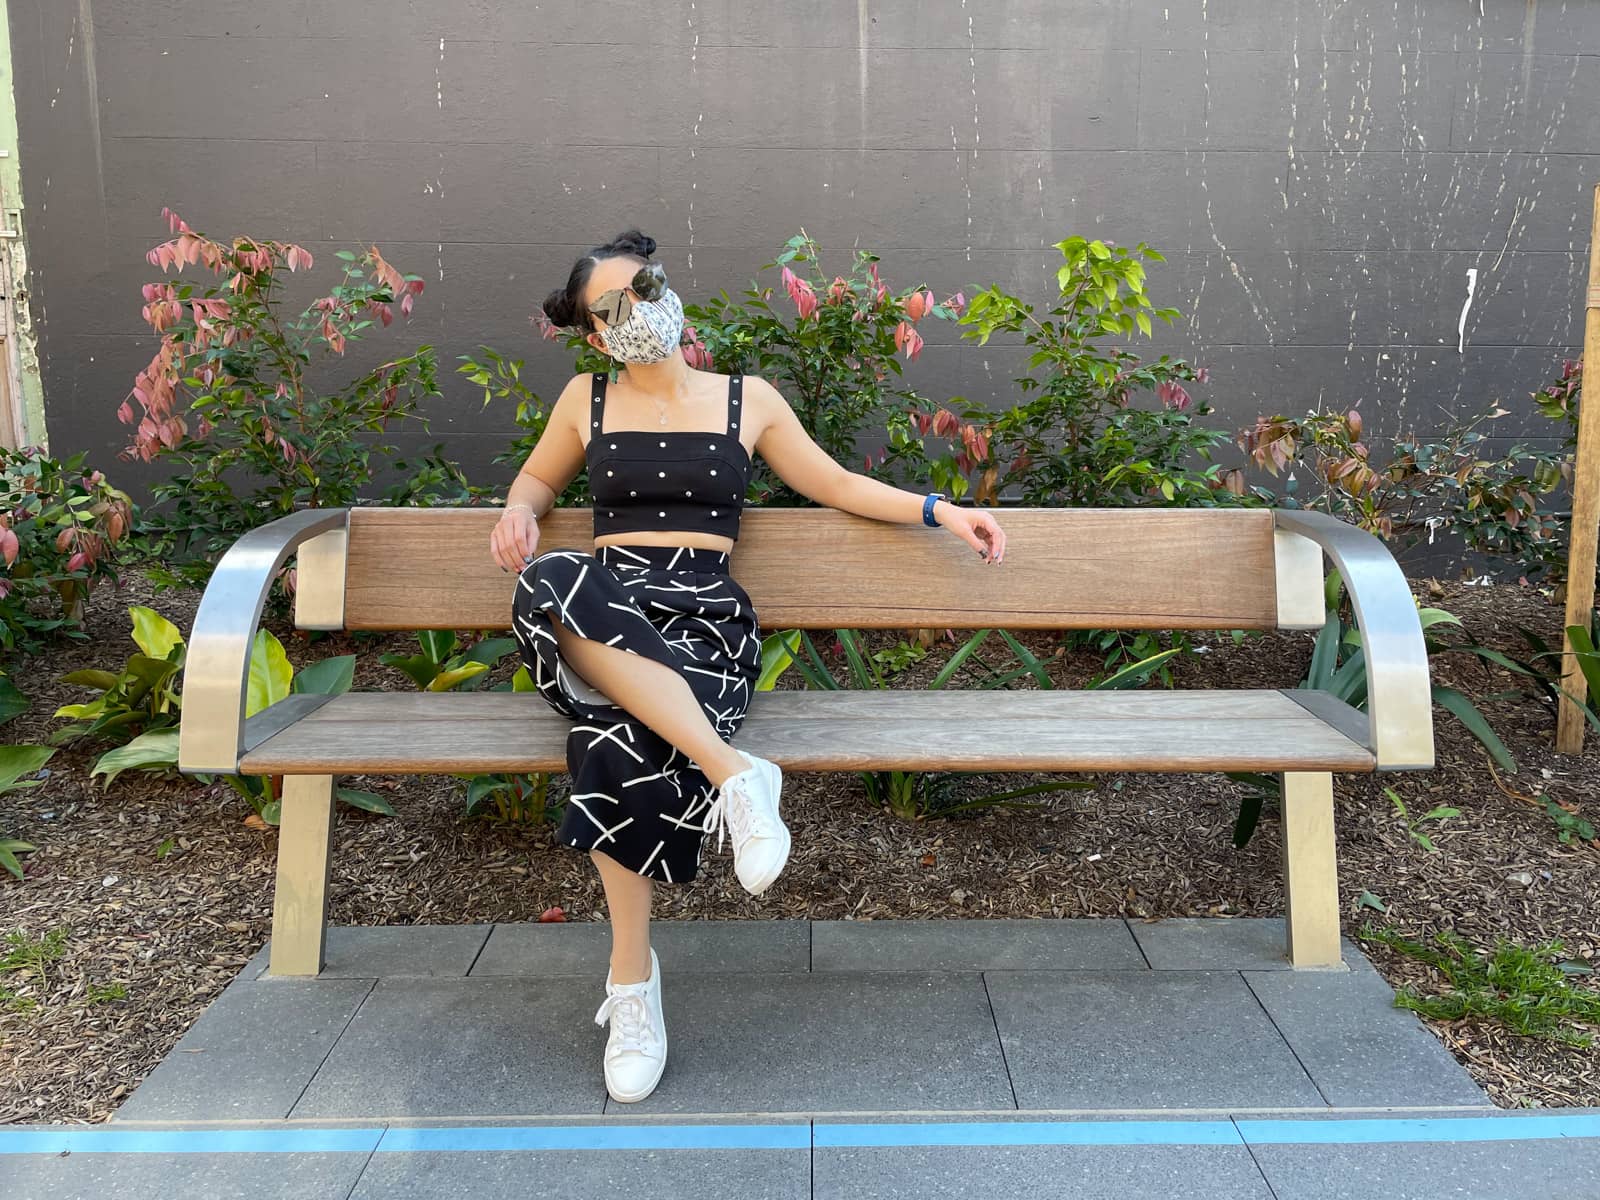 image 7: Same woman and outfit as image 1, same setting as image 1. She is sitting outside, on a wooden bench with metal armrests. She has round tortoiseshell sunglasses covering her eyes. One leg is loosely crossed over the other and her elbows are resting on the back of the bench.